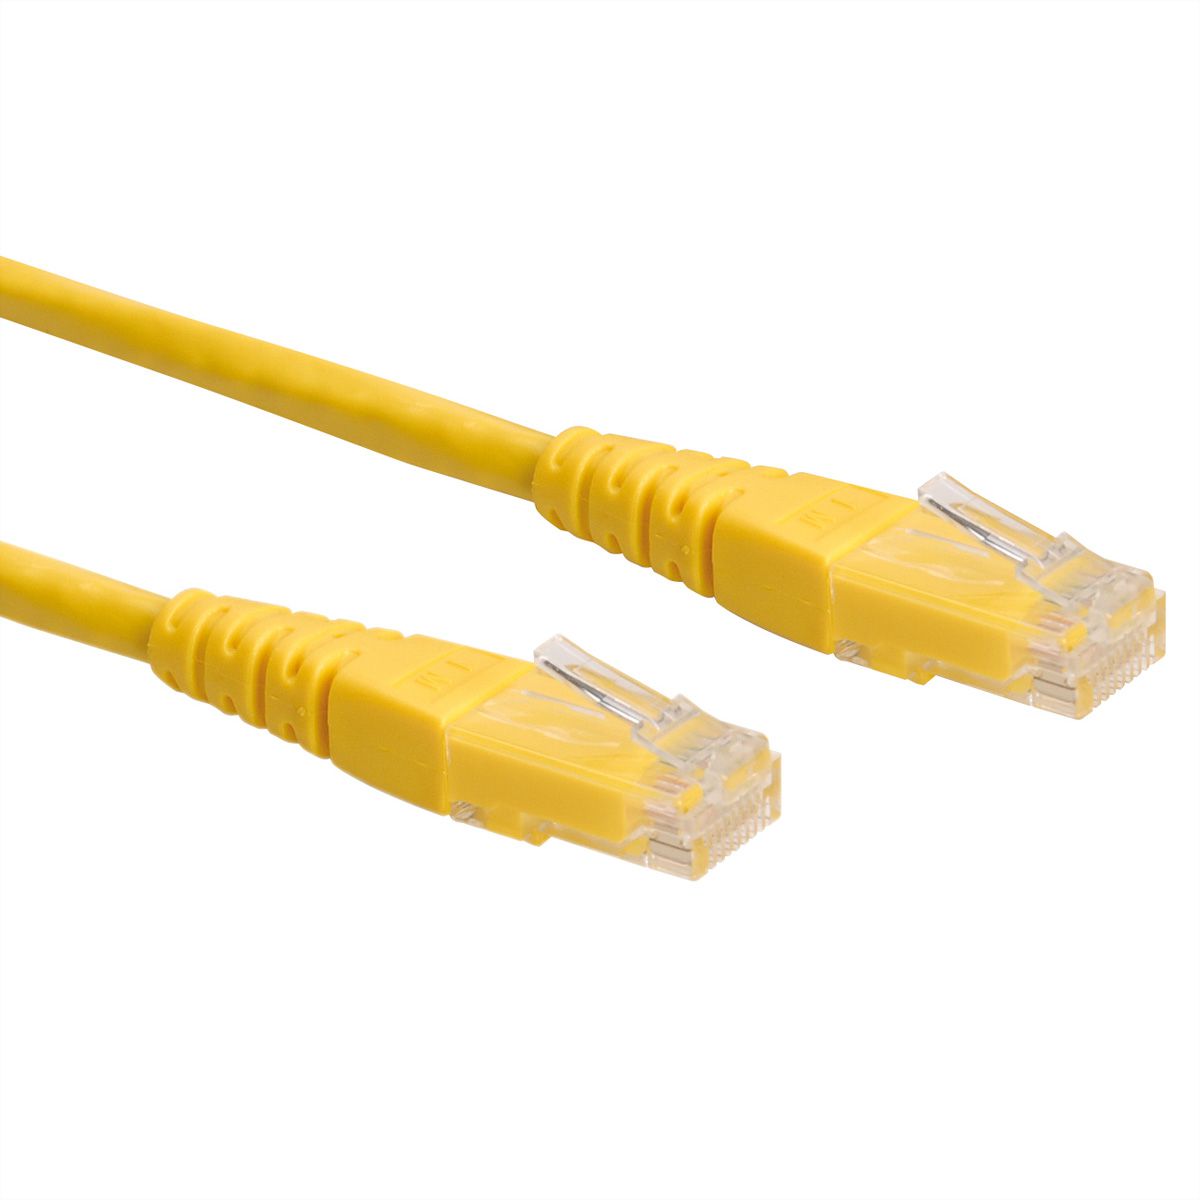 Gold Plated Yellow MyCableMart 1ft Network Patch Cord CAT6 Stranded